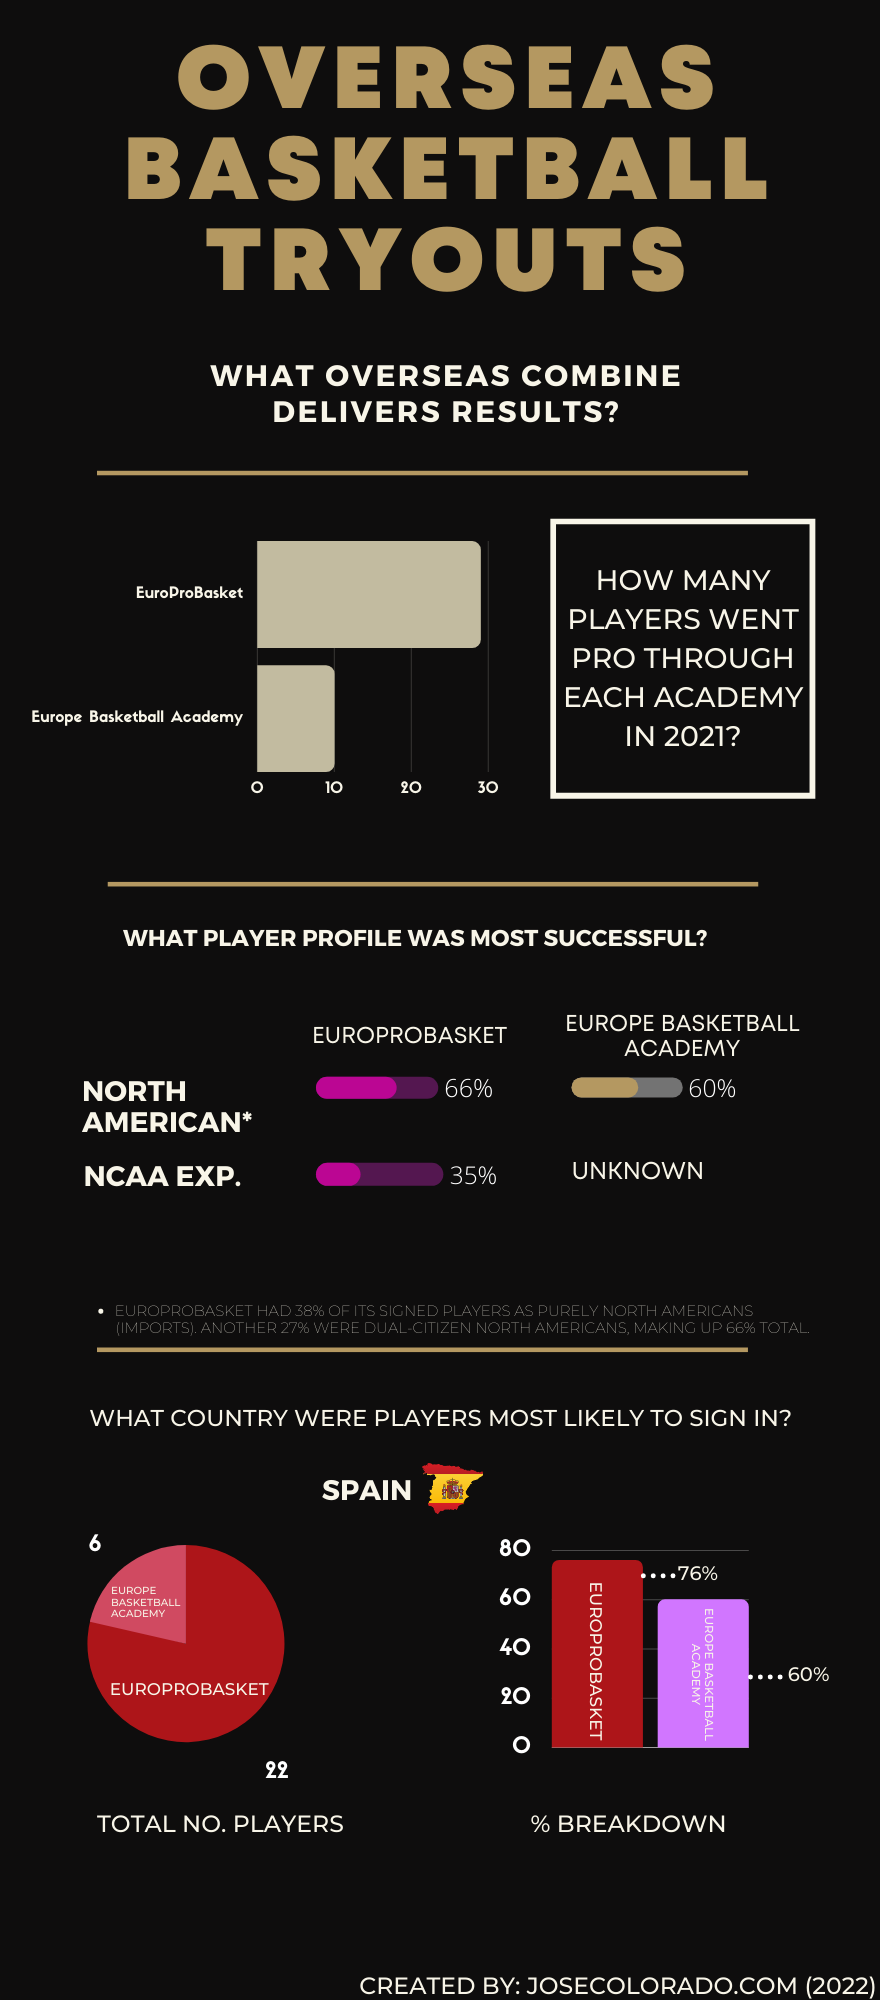 Overseas Basketball Tryouts can be found throughout the world.